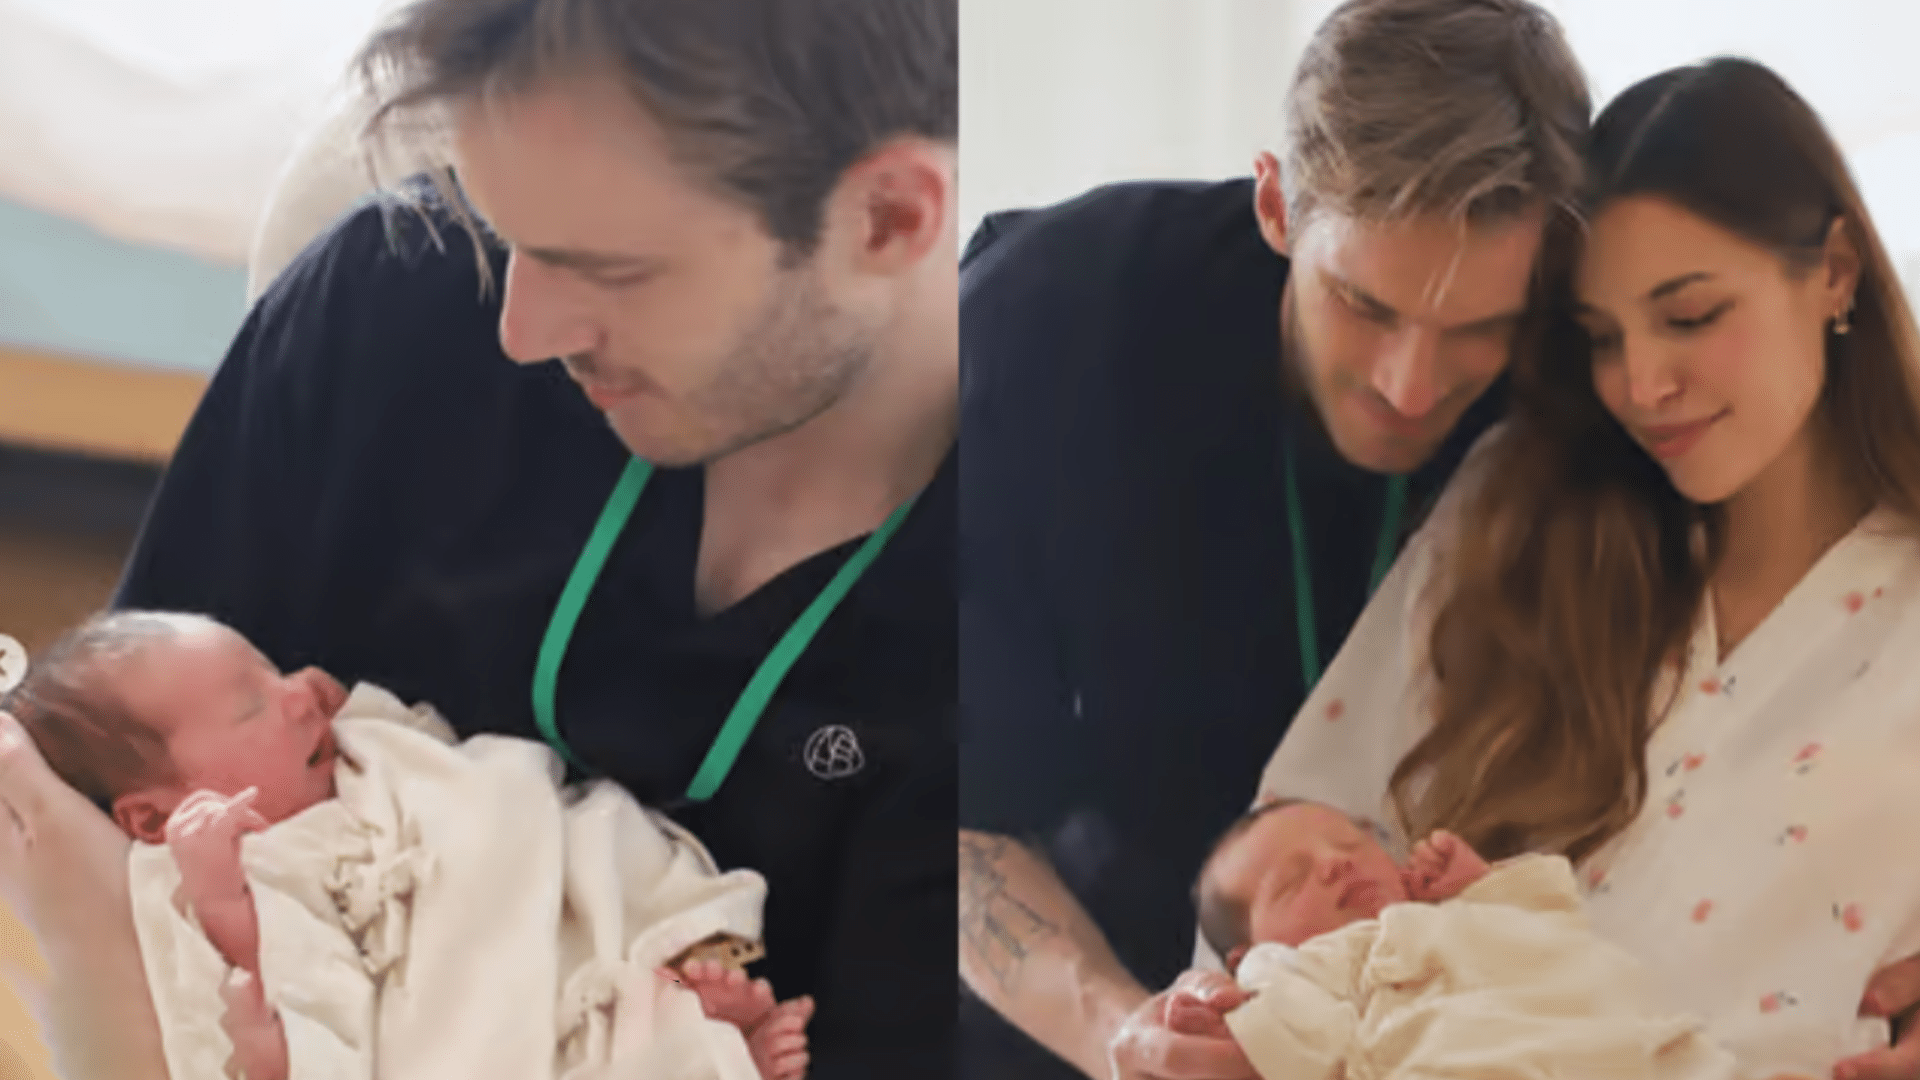 PewDiePie and Marzia with their child